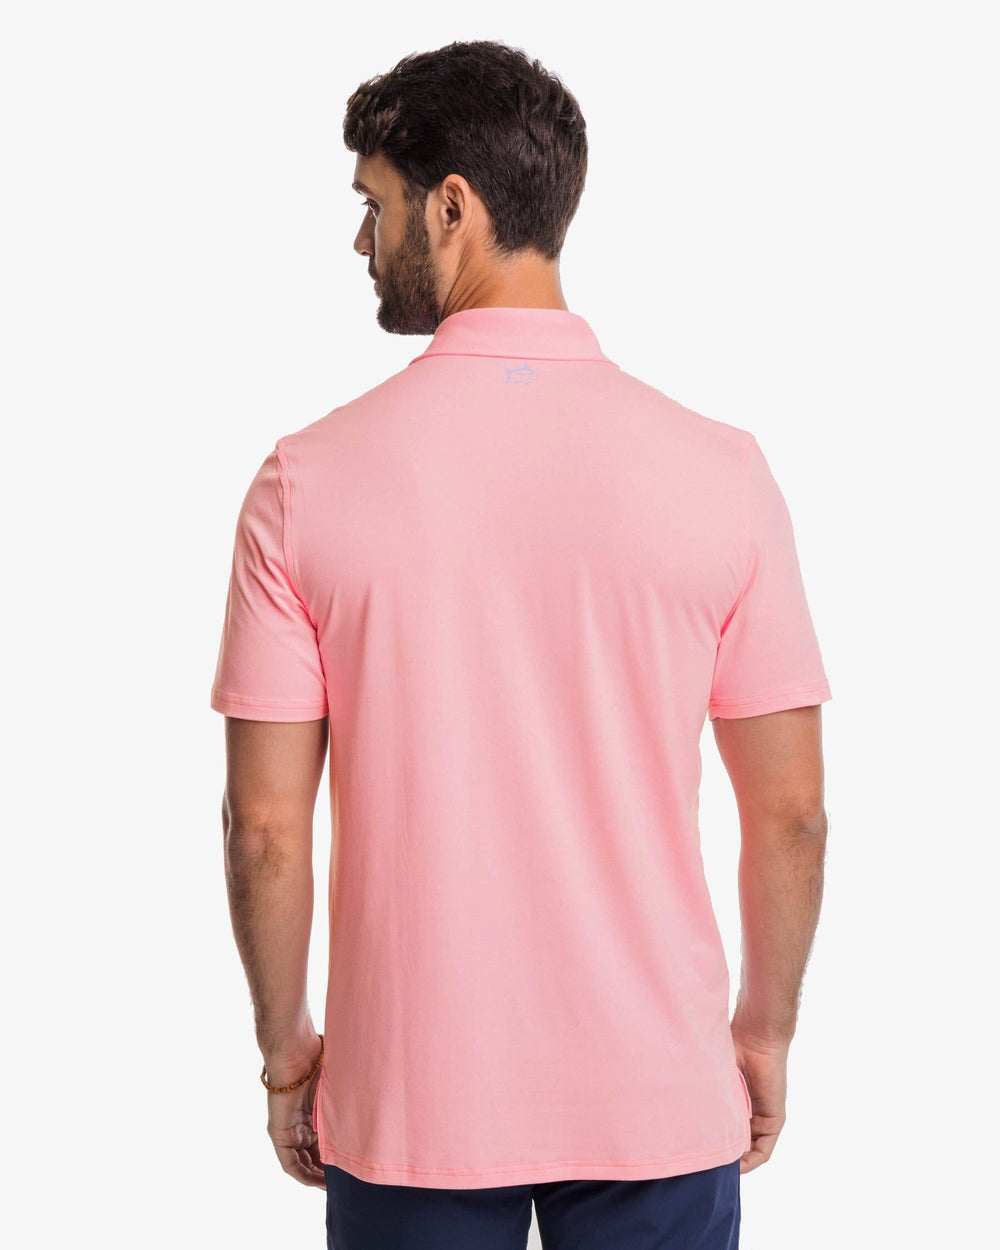 The back view of the Southern Tide Ryder Lilly Polo Shirt by Southern Tide - Mandevilla Baby